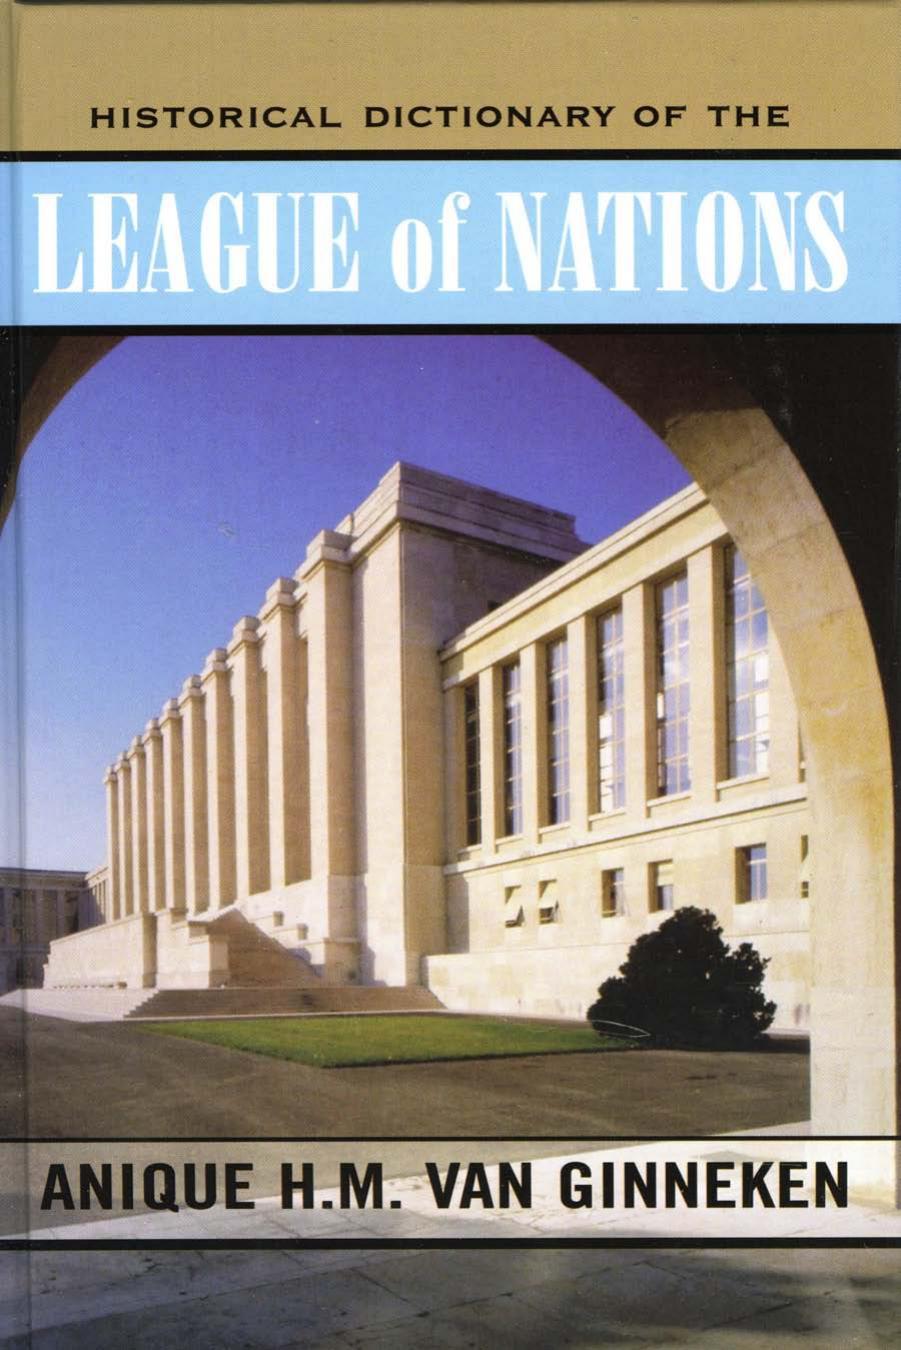 Historical Dictionary of the League of Nations